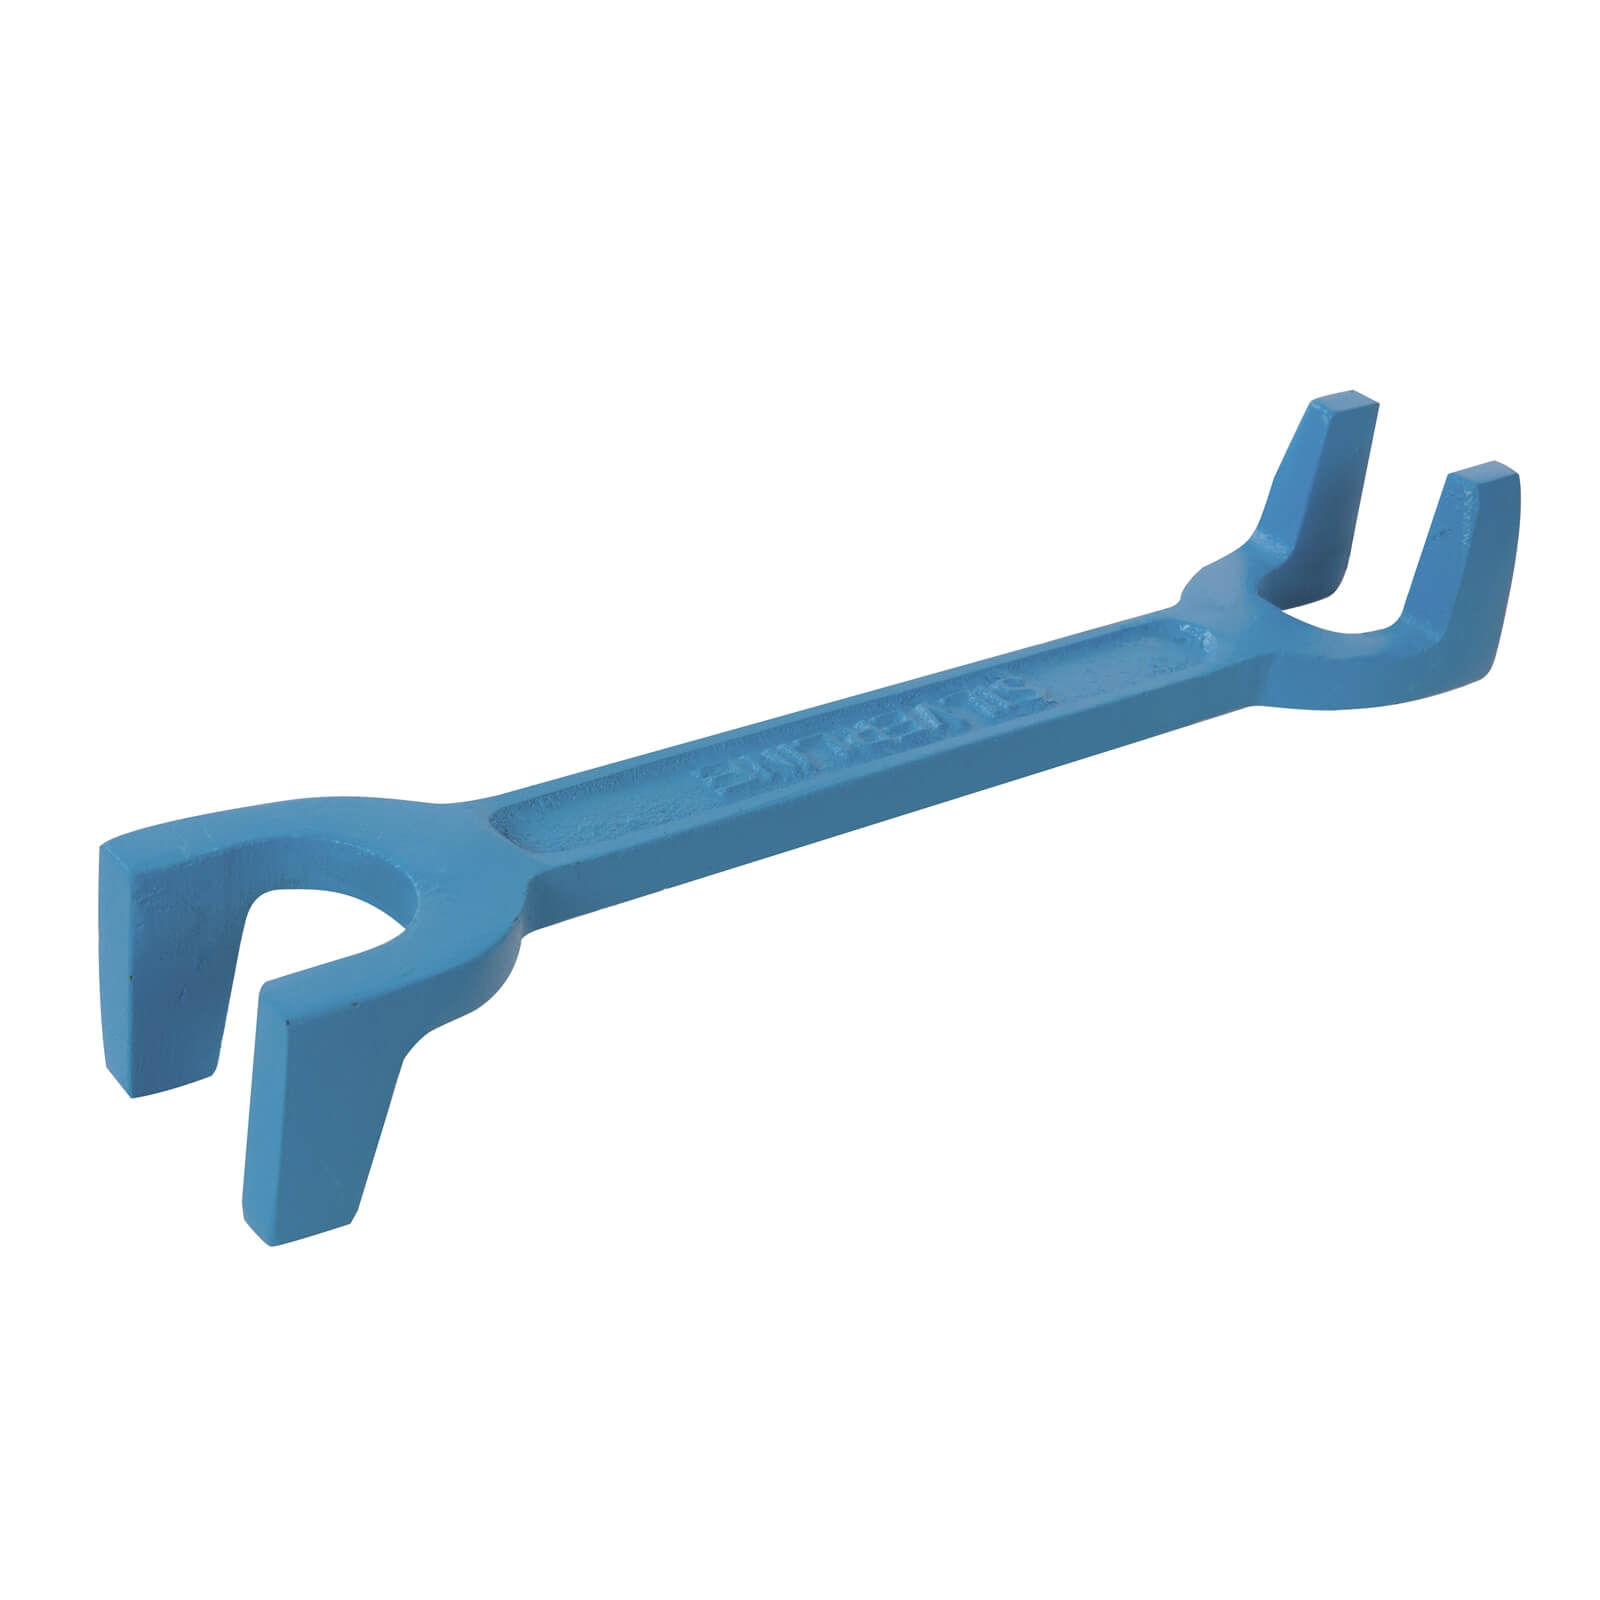 Silverline Basin Wrench 15mm 22mm Fittings